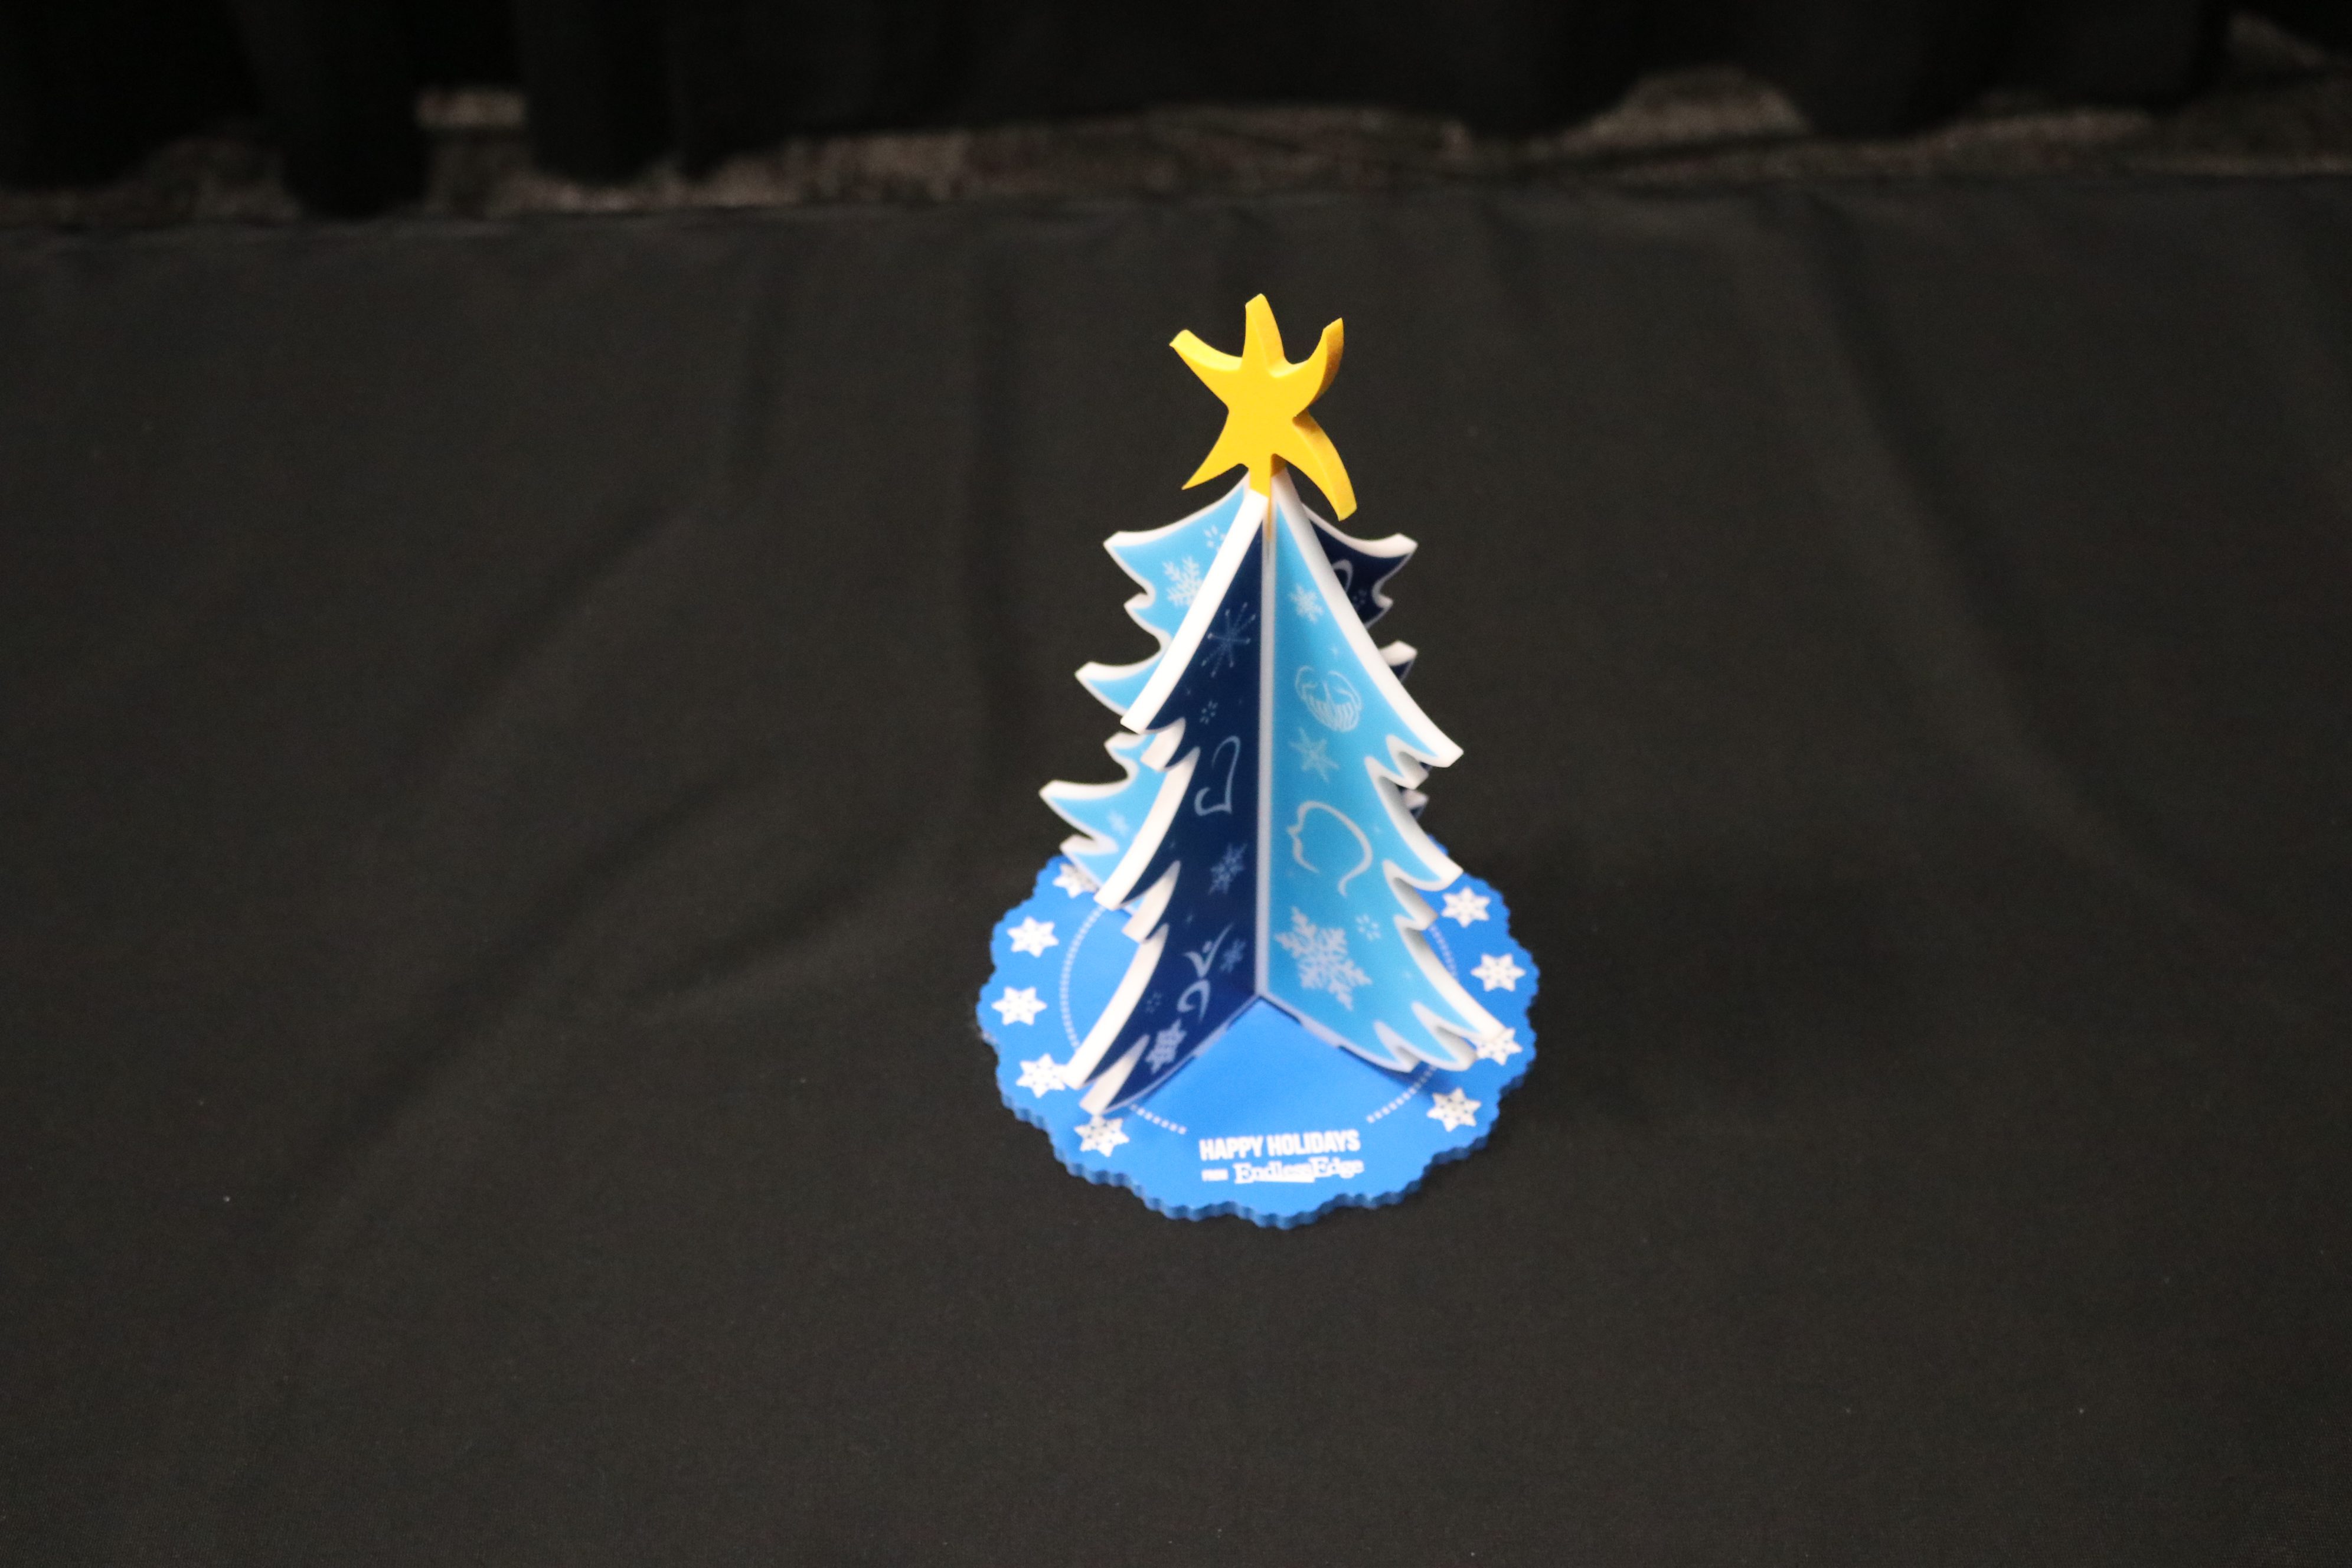 Tabletop display of a Christmas tree printed on white acrylic and colored PVC.